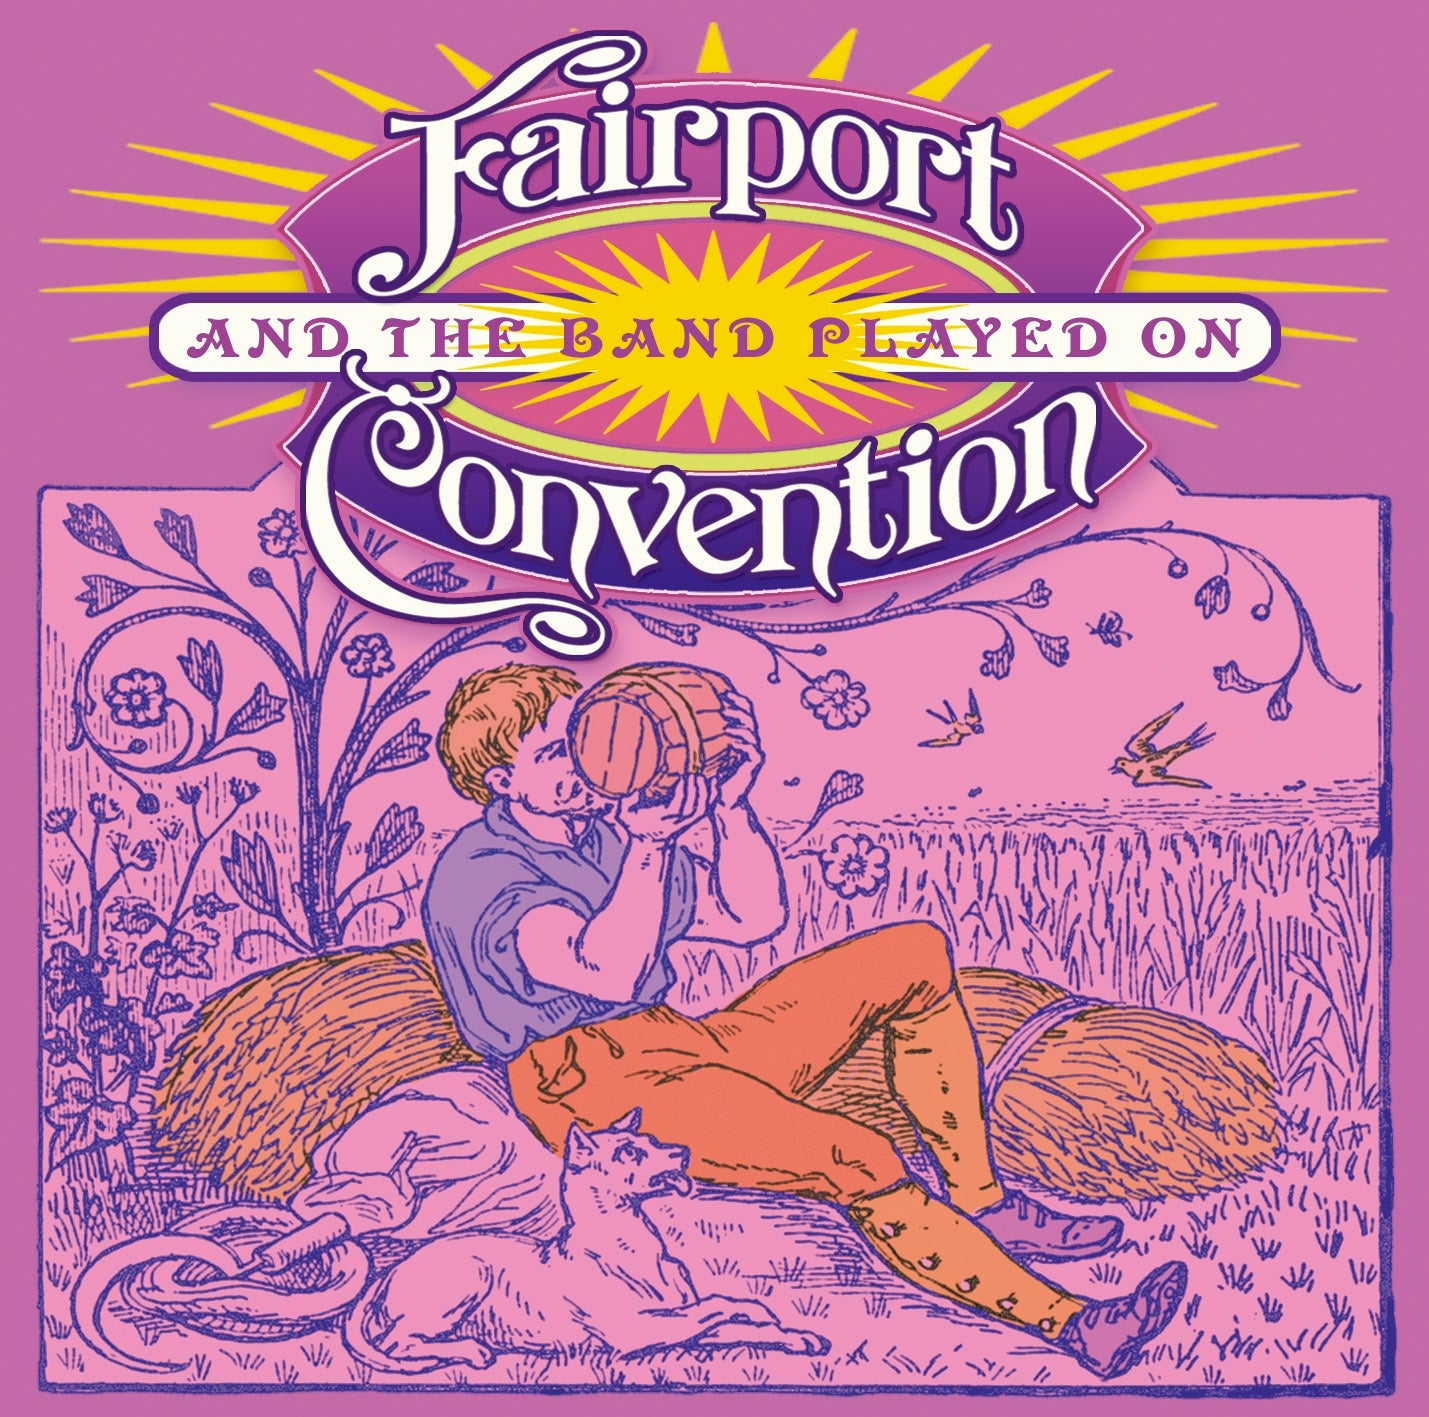 Fairport Convention - And The Band Played On - 2CD Album - Secret Records Limited